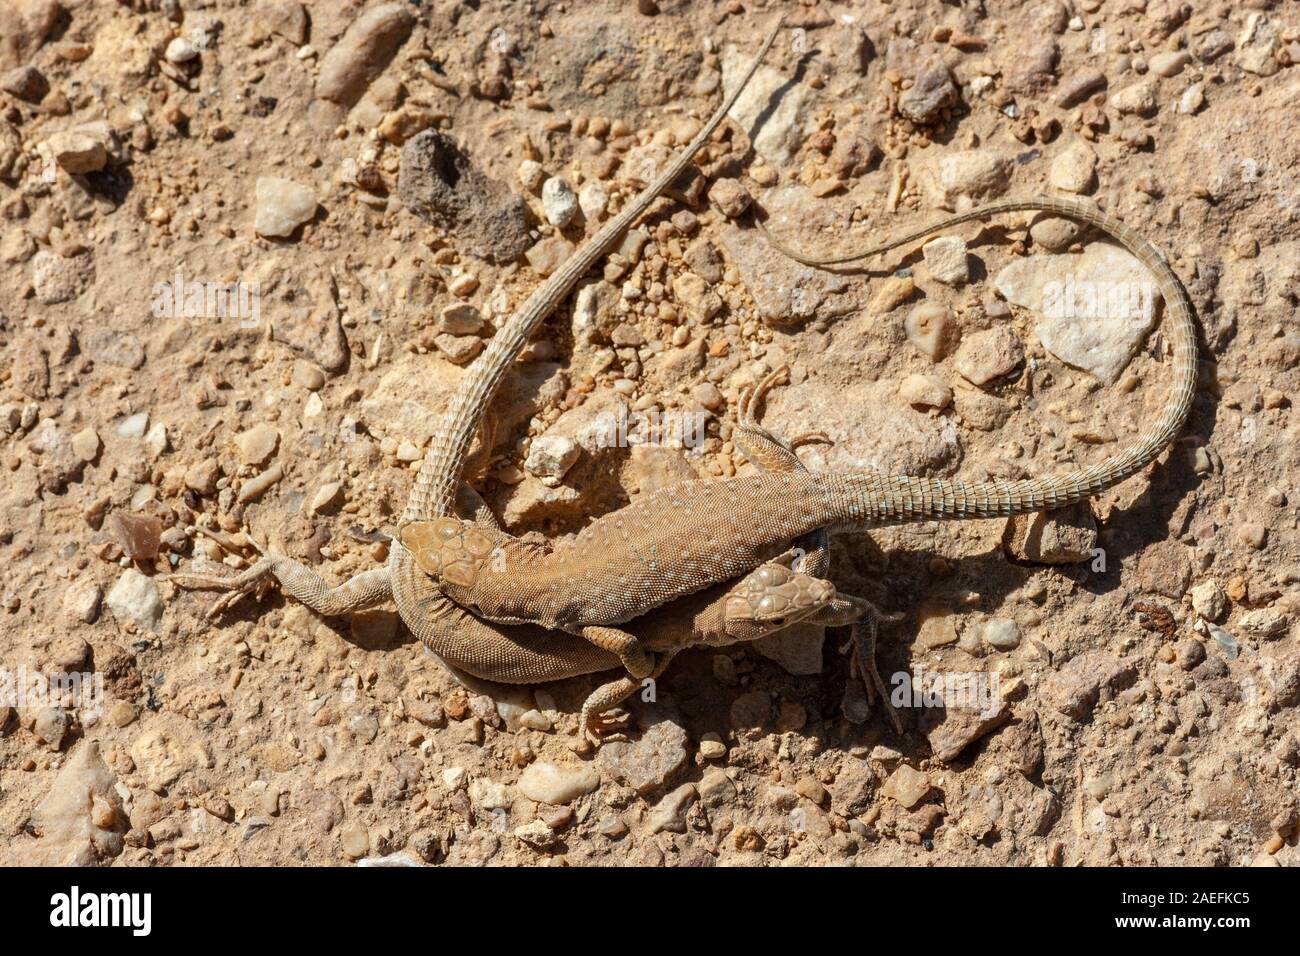 The Be'er Sheva fringe-fingered lizard (Acanthodactylus beershebensis) is a species of lizard in the family Lacertidae. It is a member of the subfamil Stock Photo